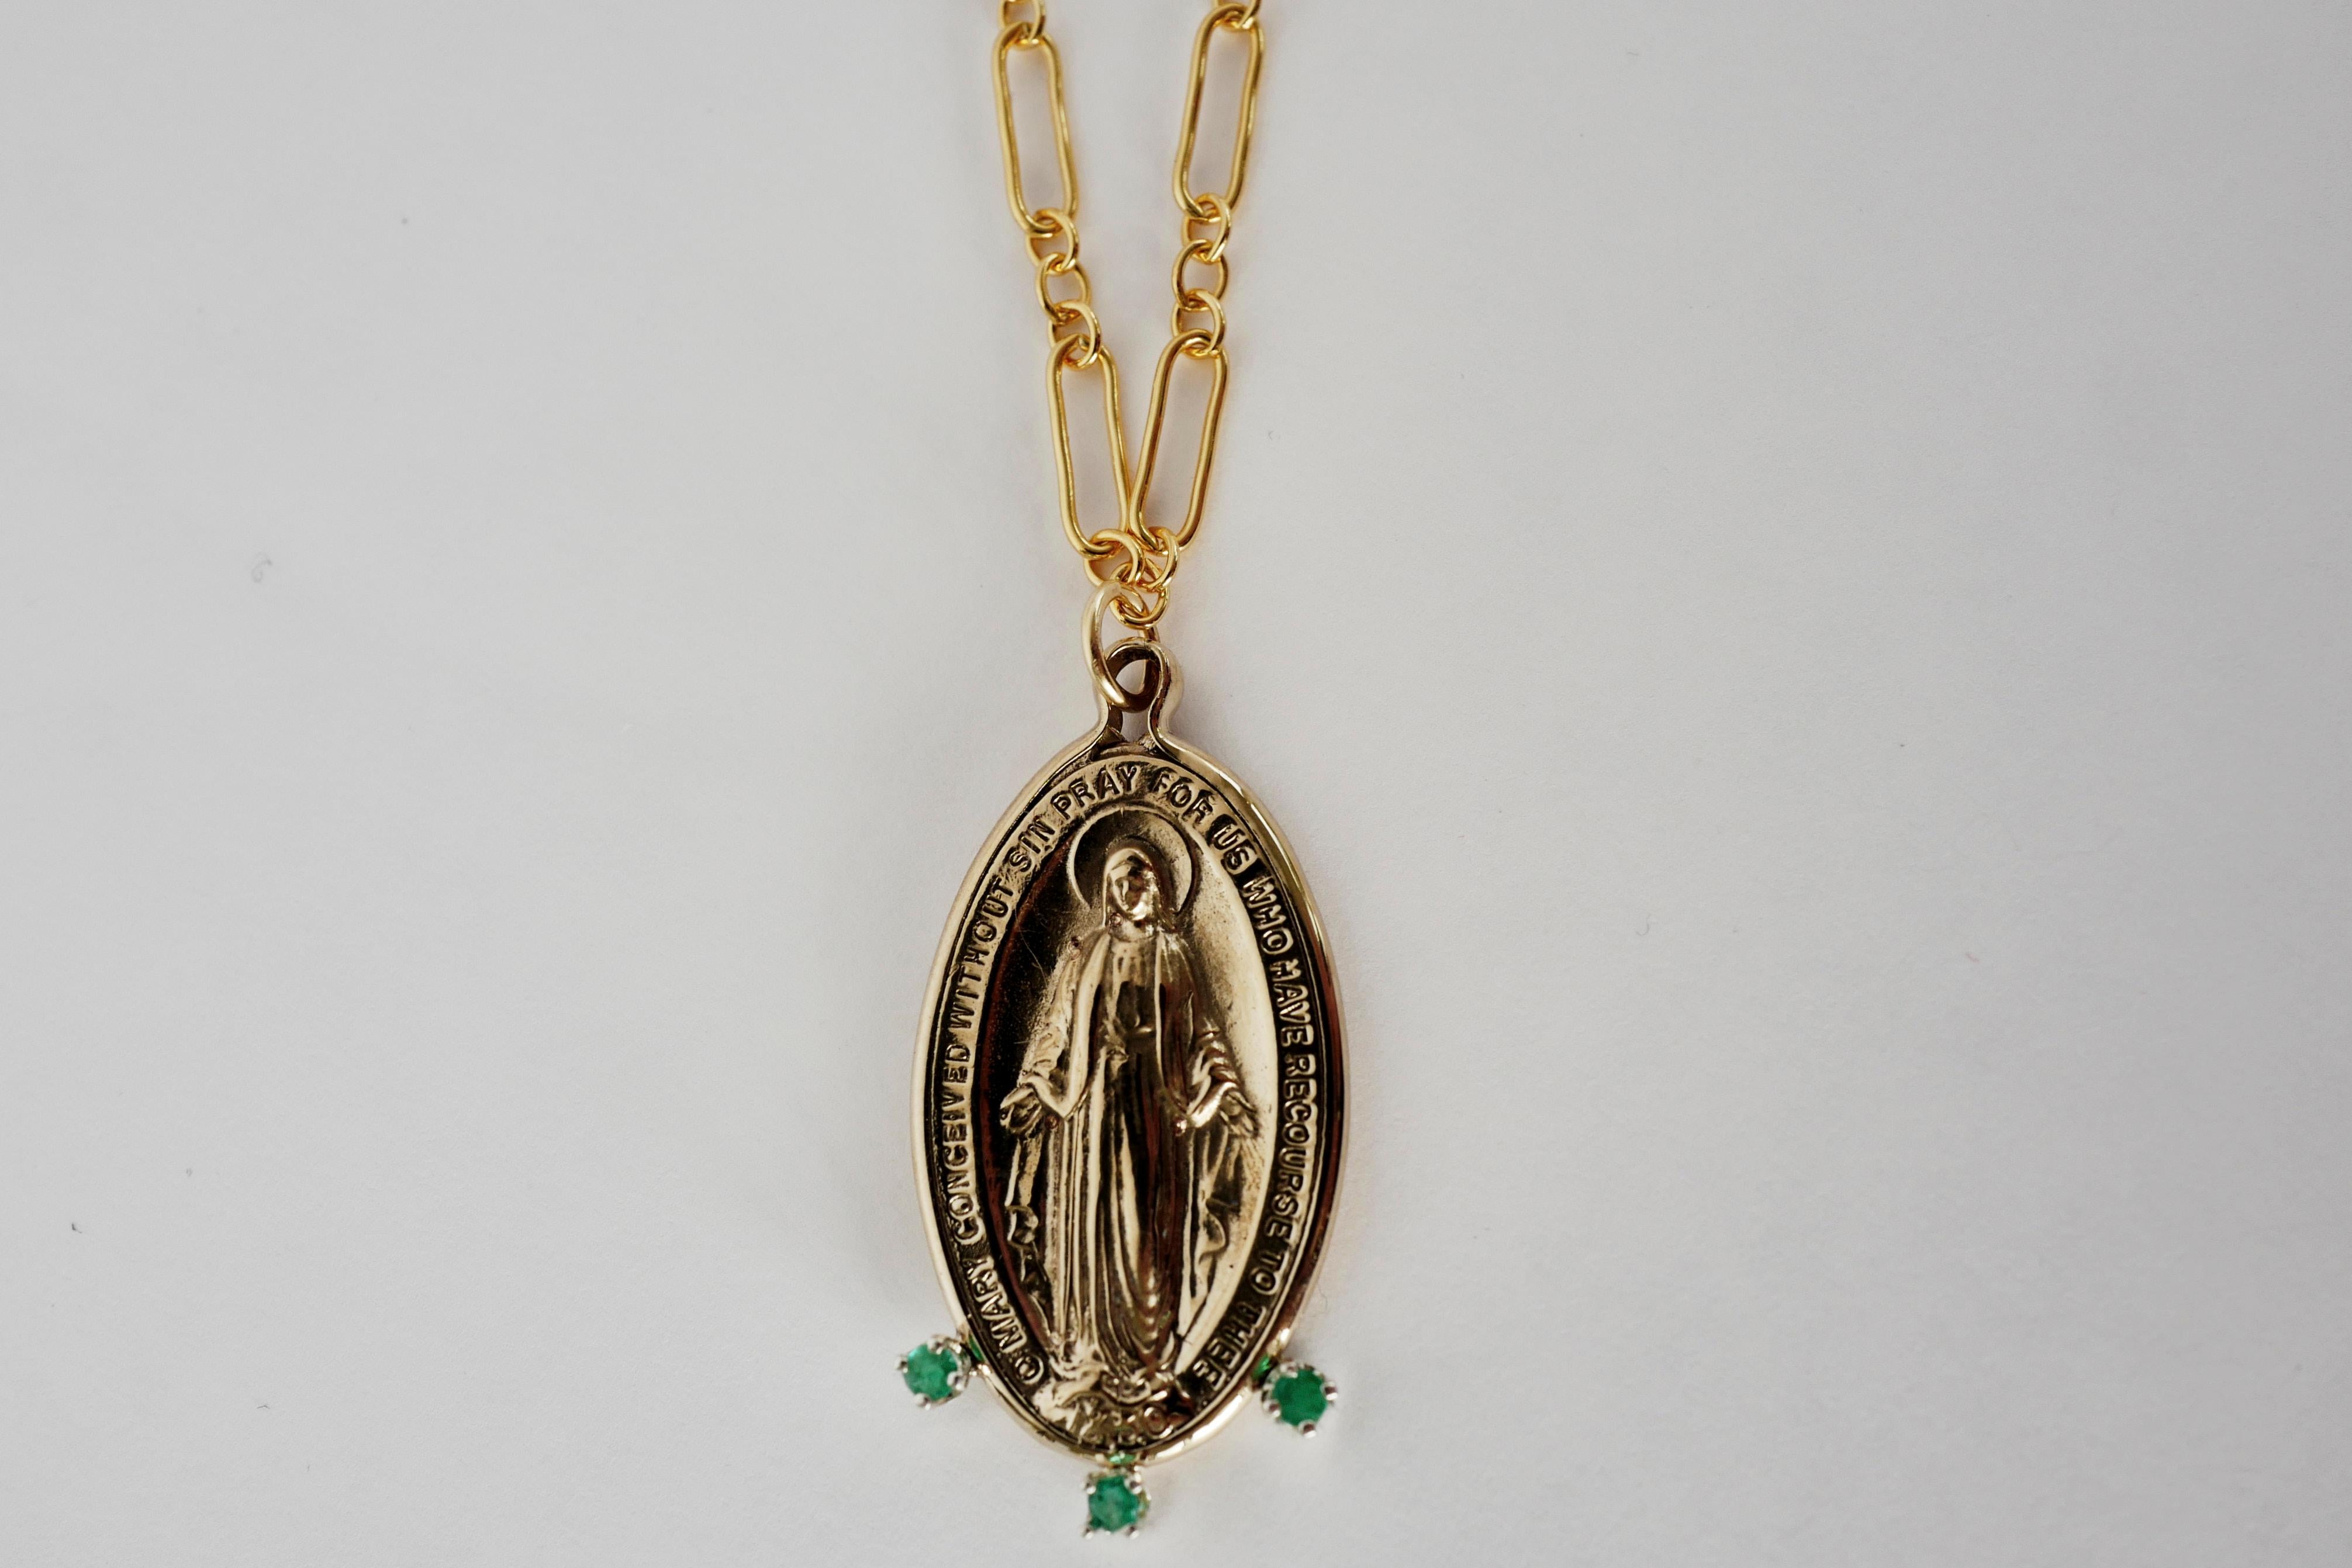 Women's Emerald Virgin Mary Medal Chunky Chain Necklace Bronze Gold Filled J Dauphin For Sale